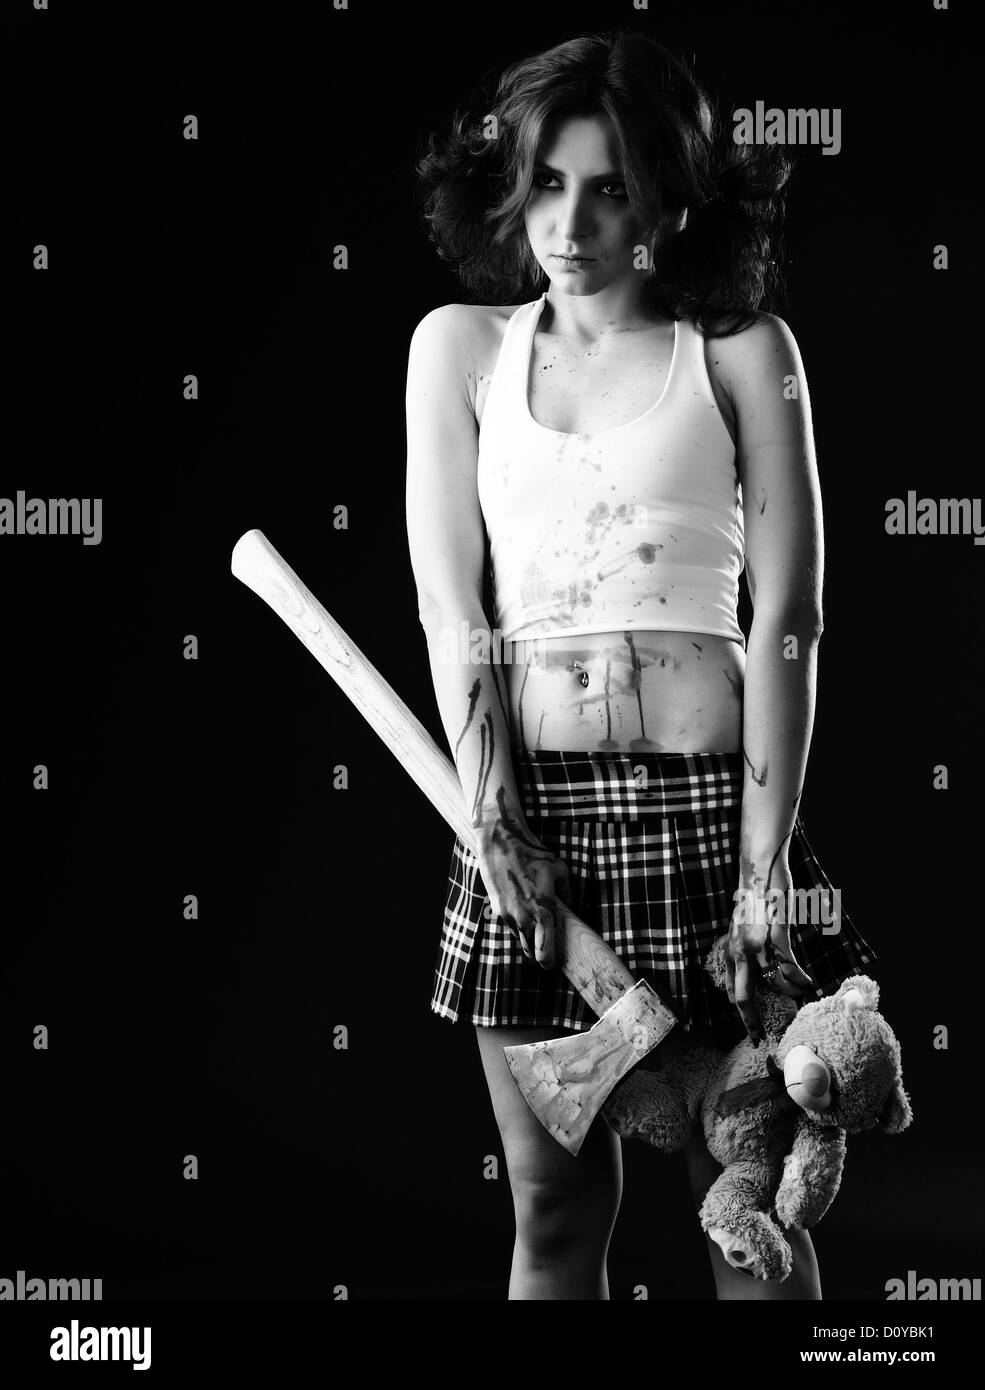 studio shot on black background: young woman holding bloody axe (axe girl) Stock Photo